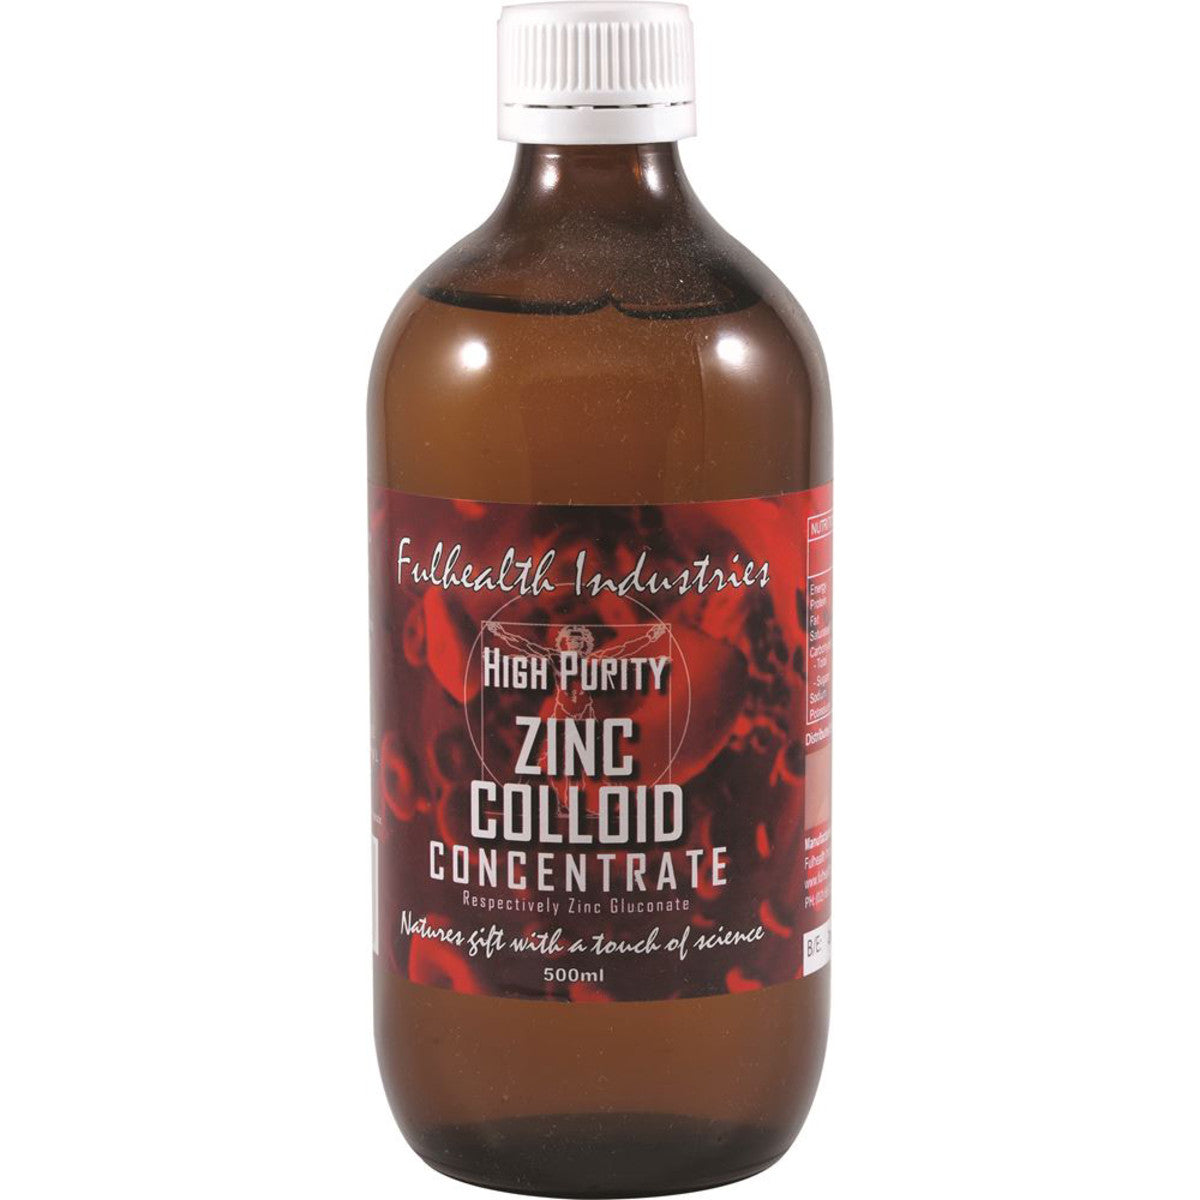 Fulhealth Industries - Zinc Colloid Concentrate